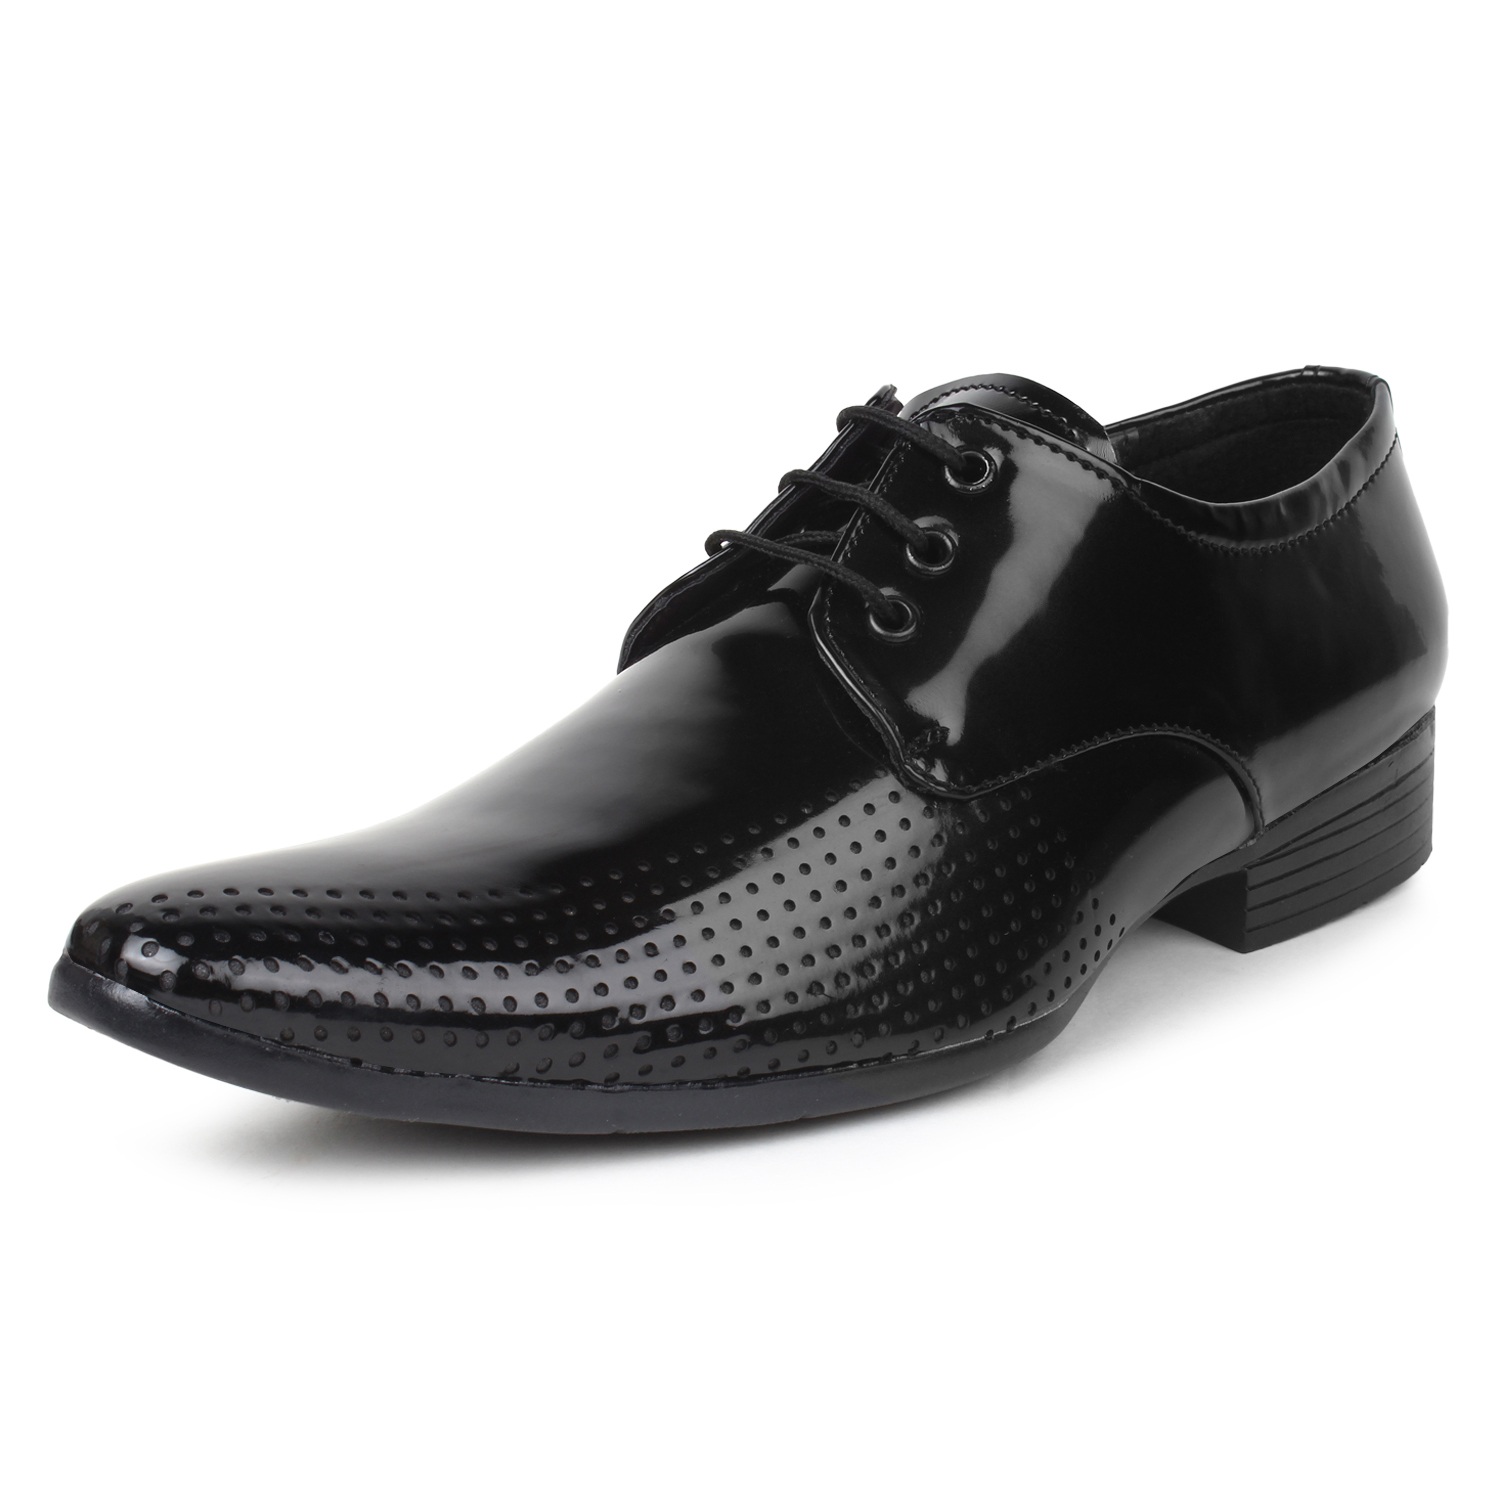 Buy Buwch Black Formal Shoe For MenBoys Online @ ₹499 from ShopClues